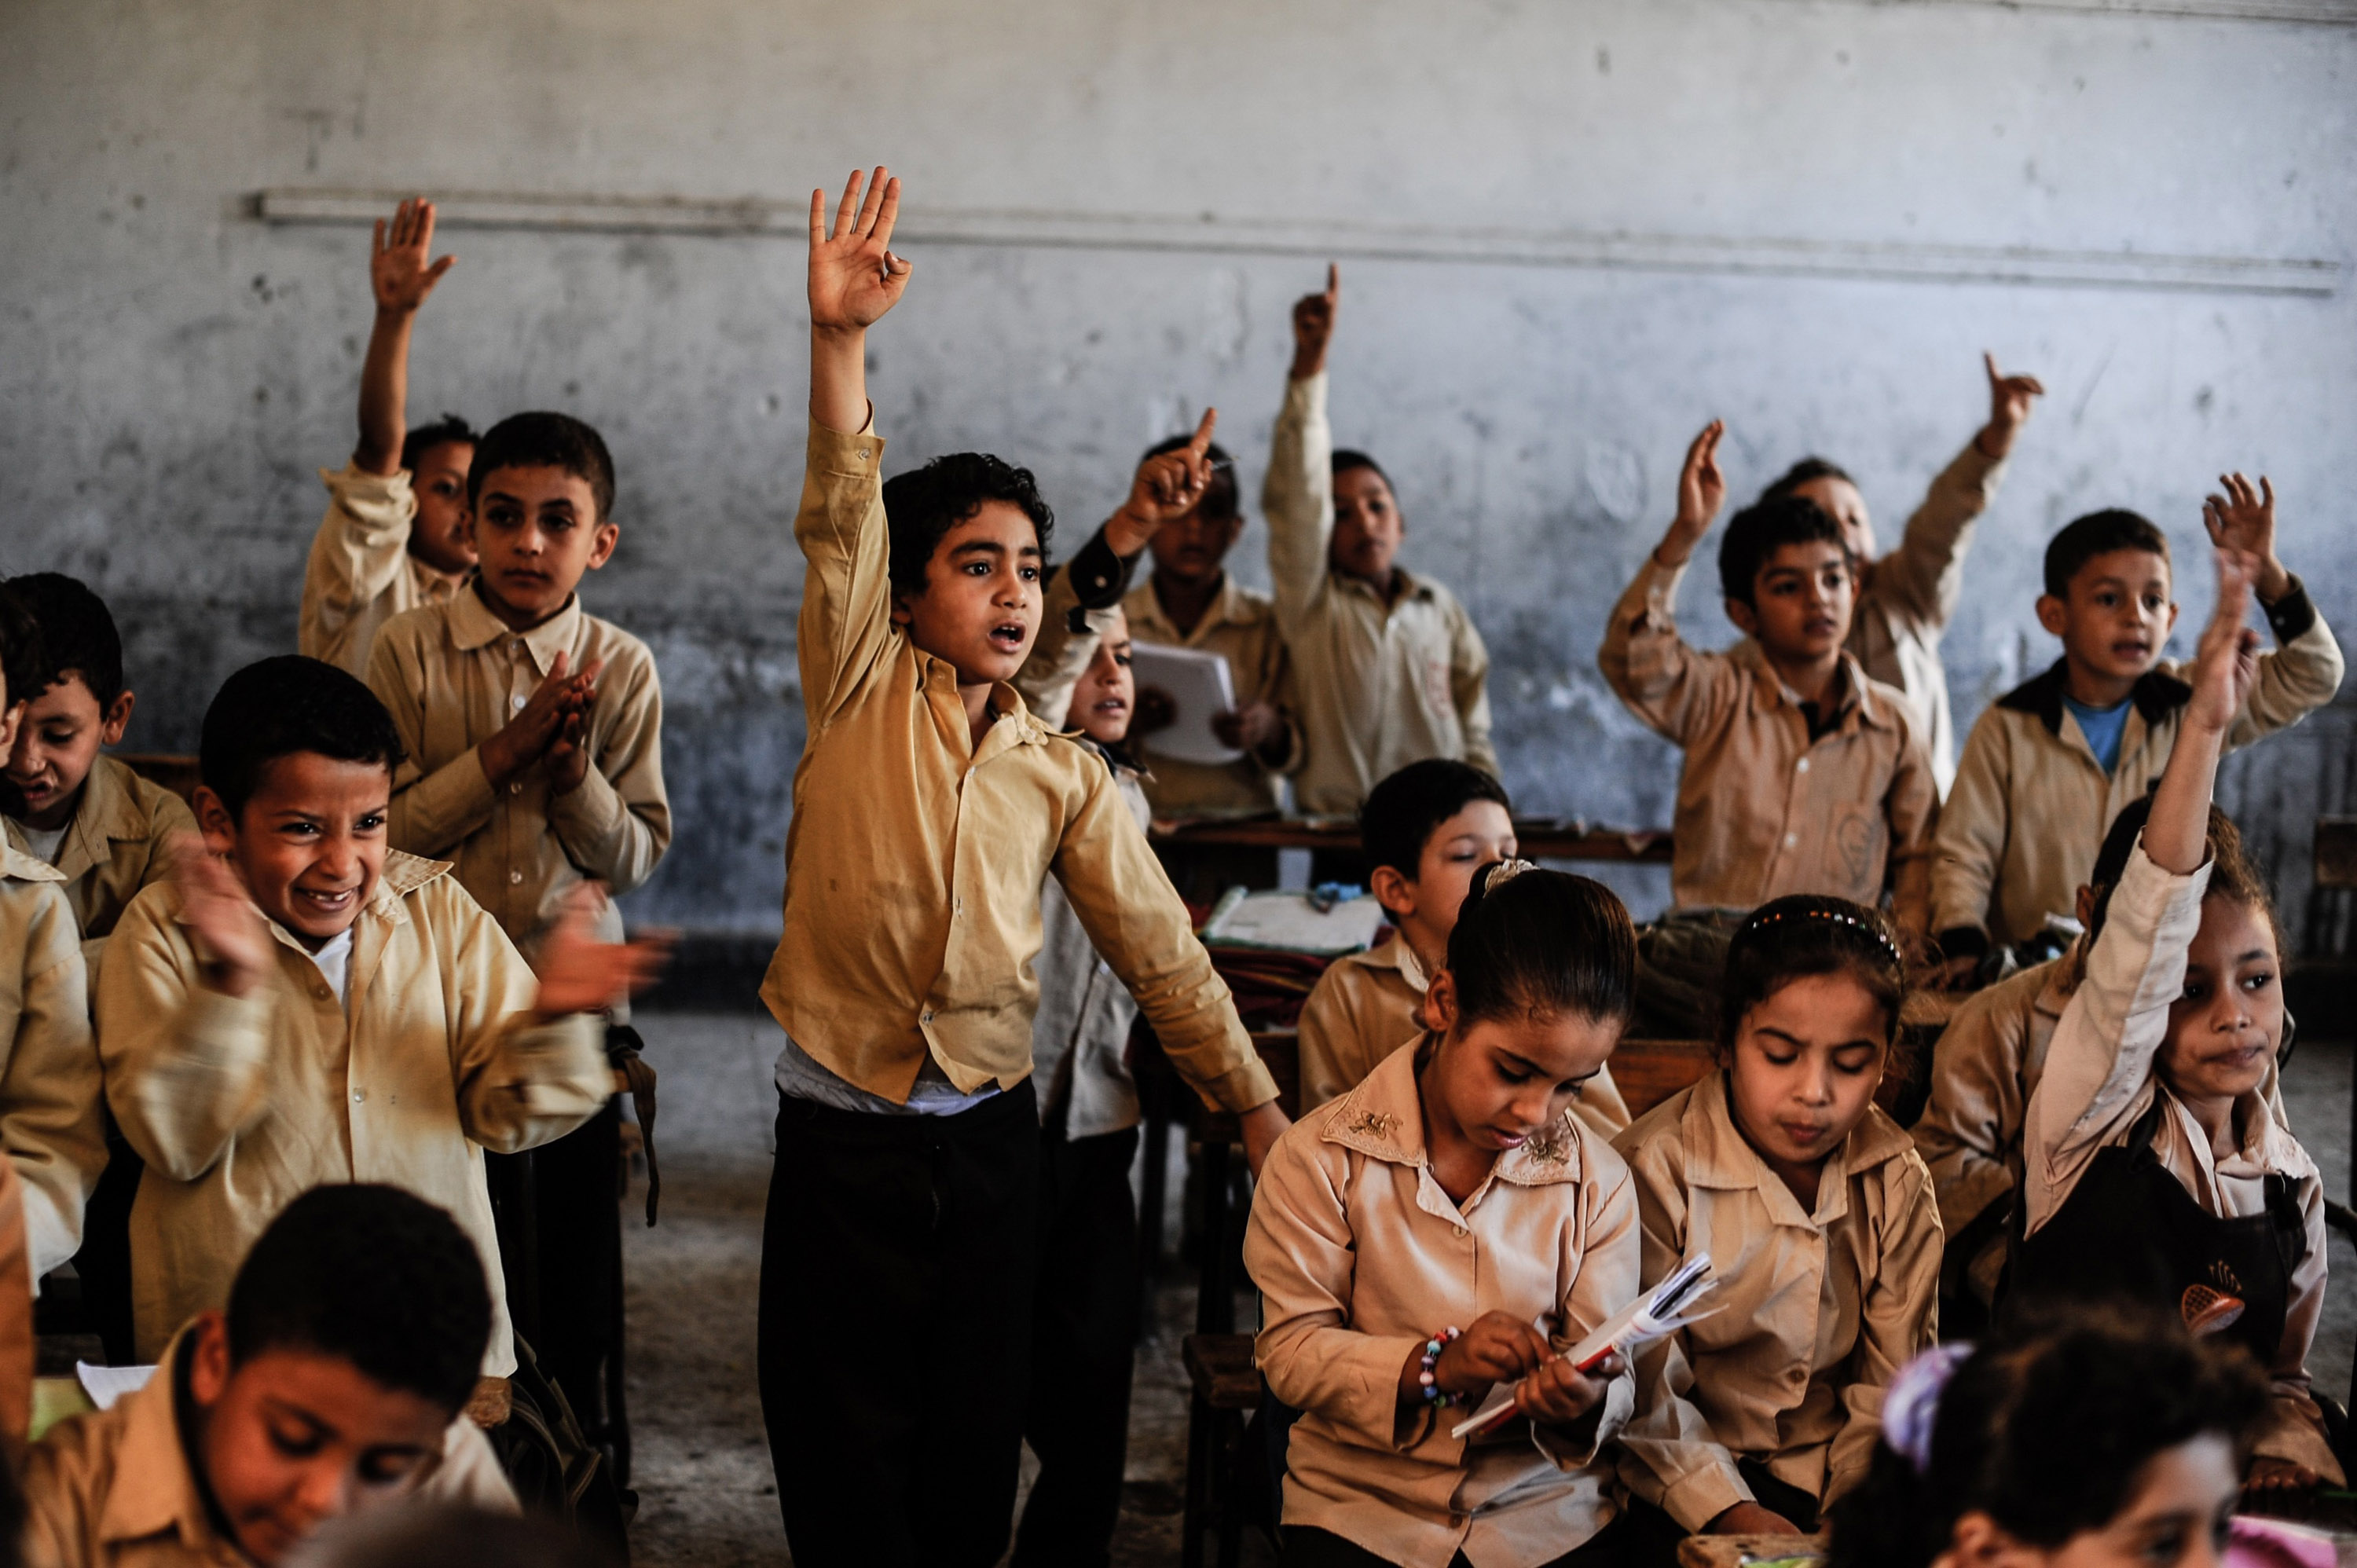 Elementary school students in Giza, Egypt, face big class sizes and poor equipment and facilities. (Mohamed Hossam—Anadolu Agency/Getty Images)